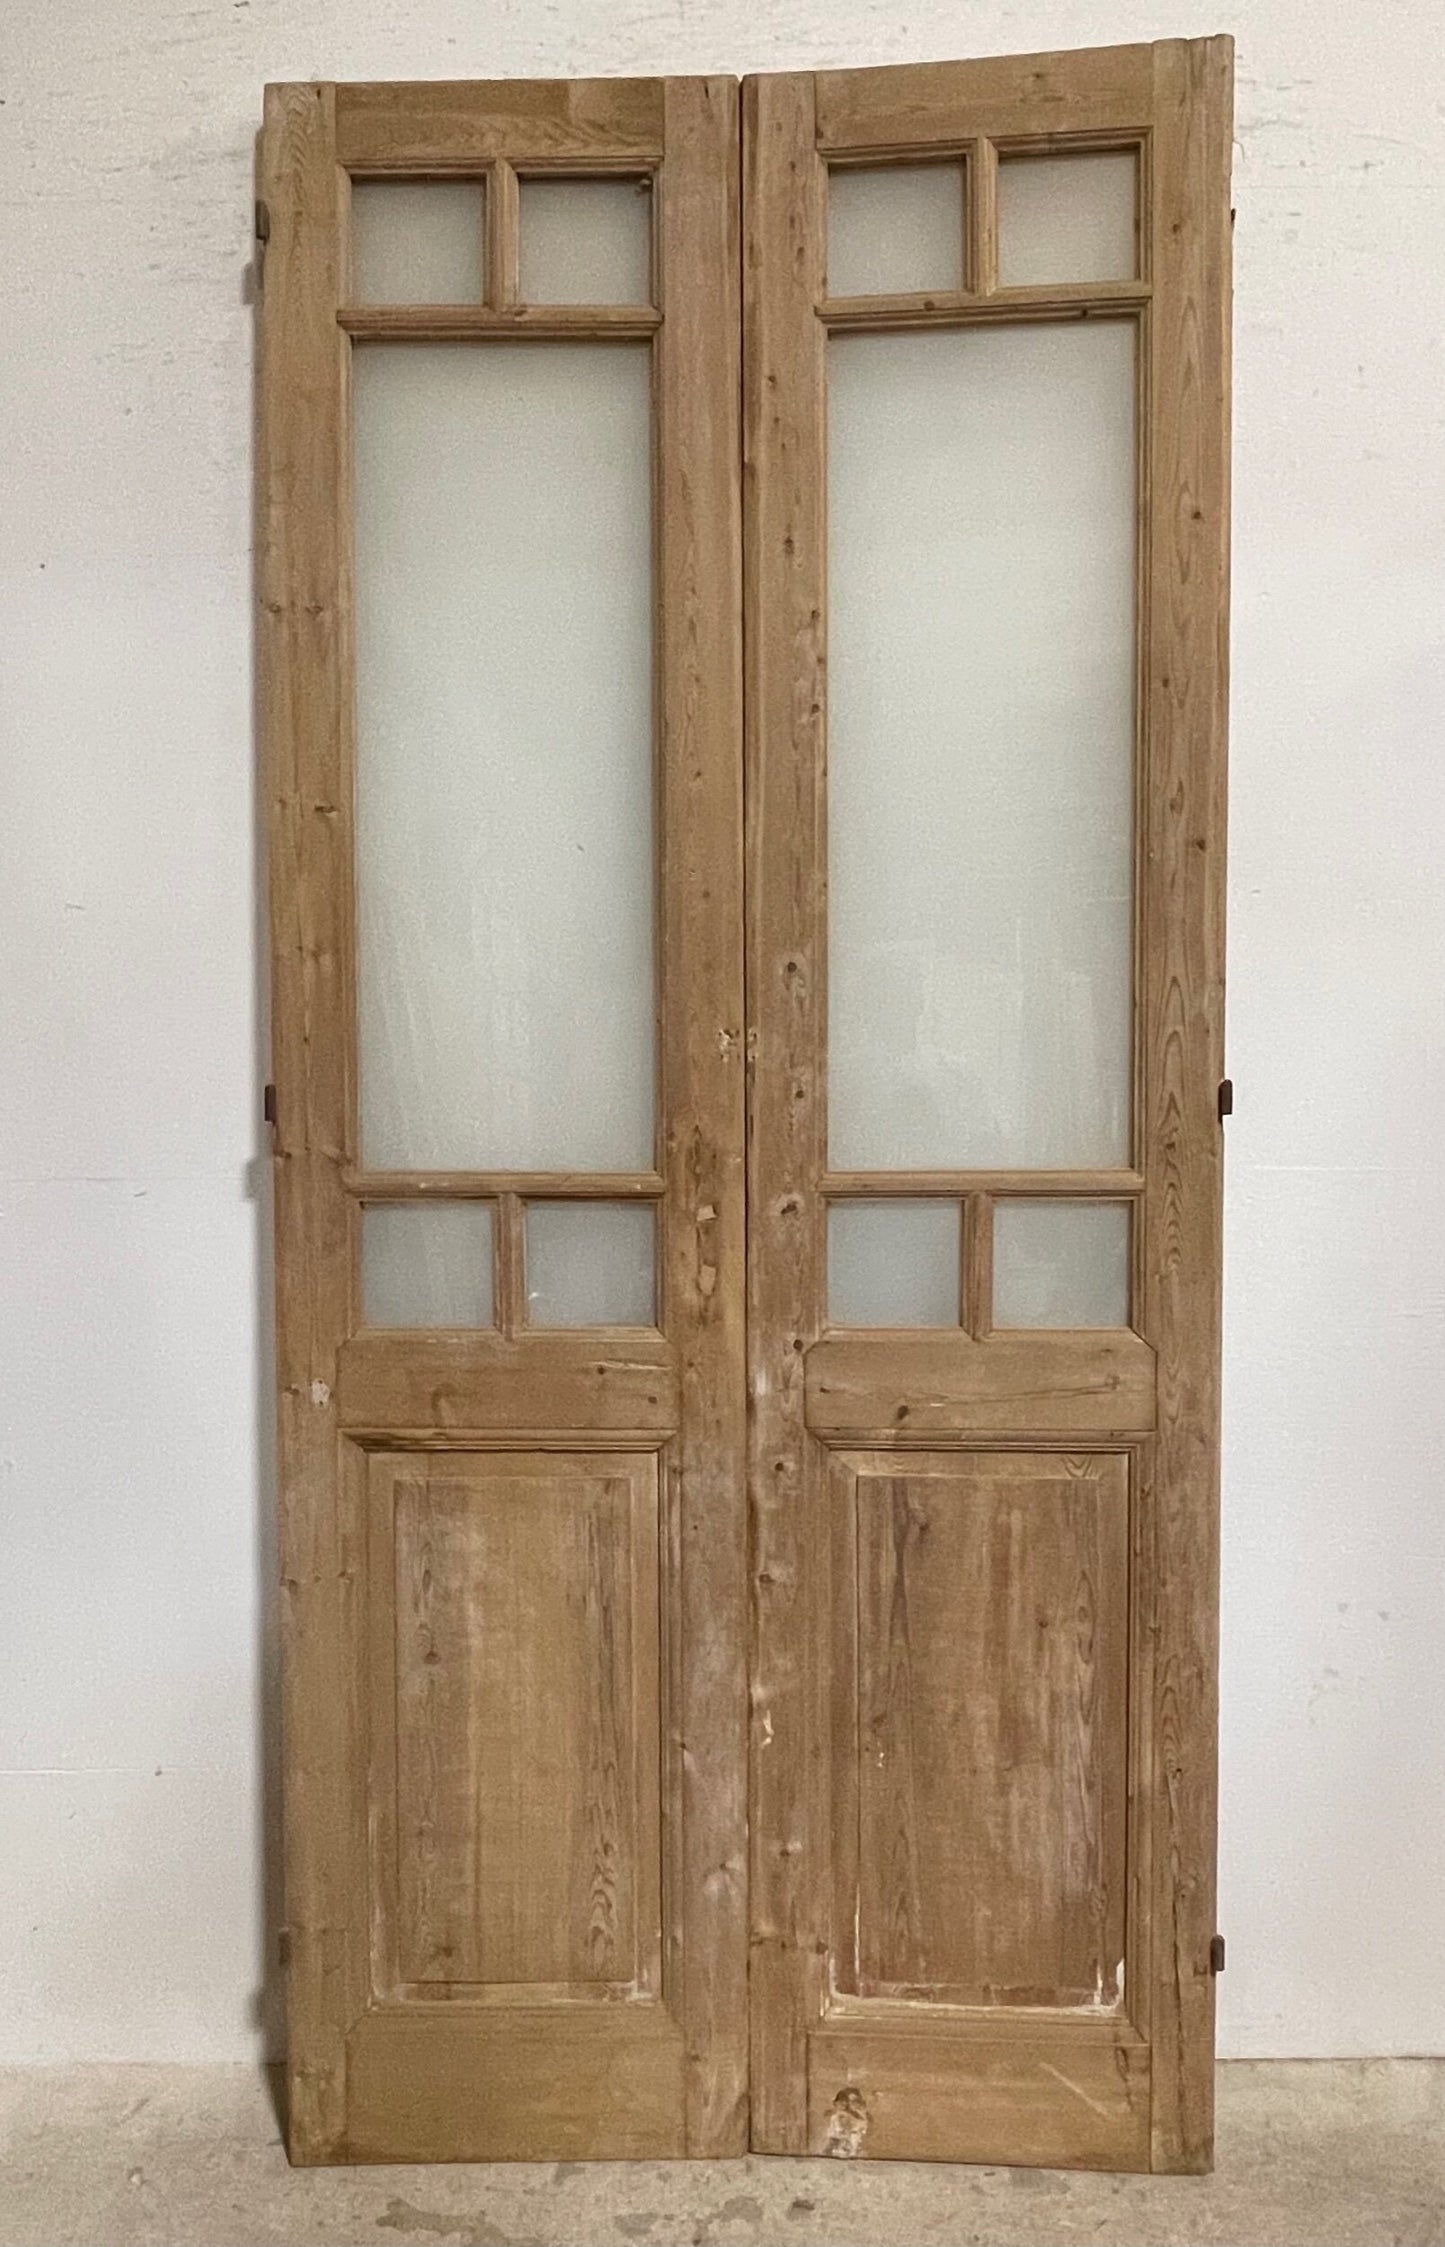 Antique French panel doors with glass (100x45.25) I250